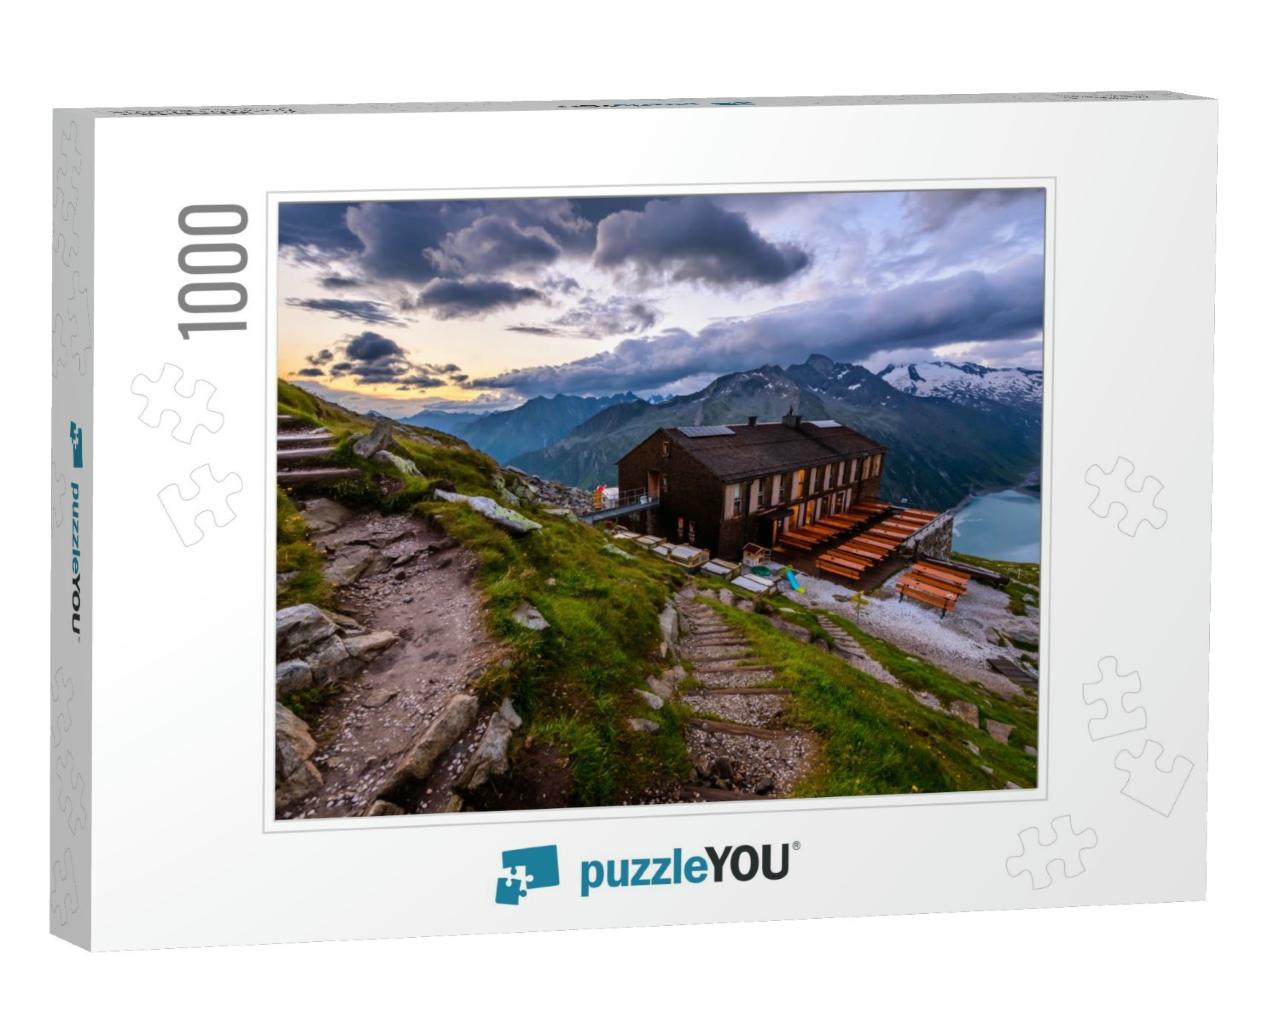 The Olpererhuette 2, 388 Meters is a Well Known German Al... Jigsaw Puzzle with 1000 pieces